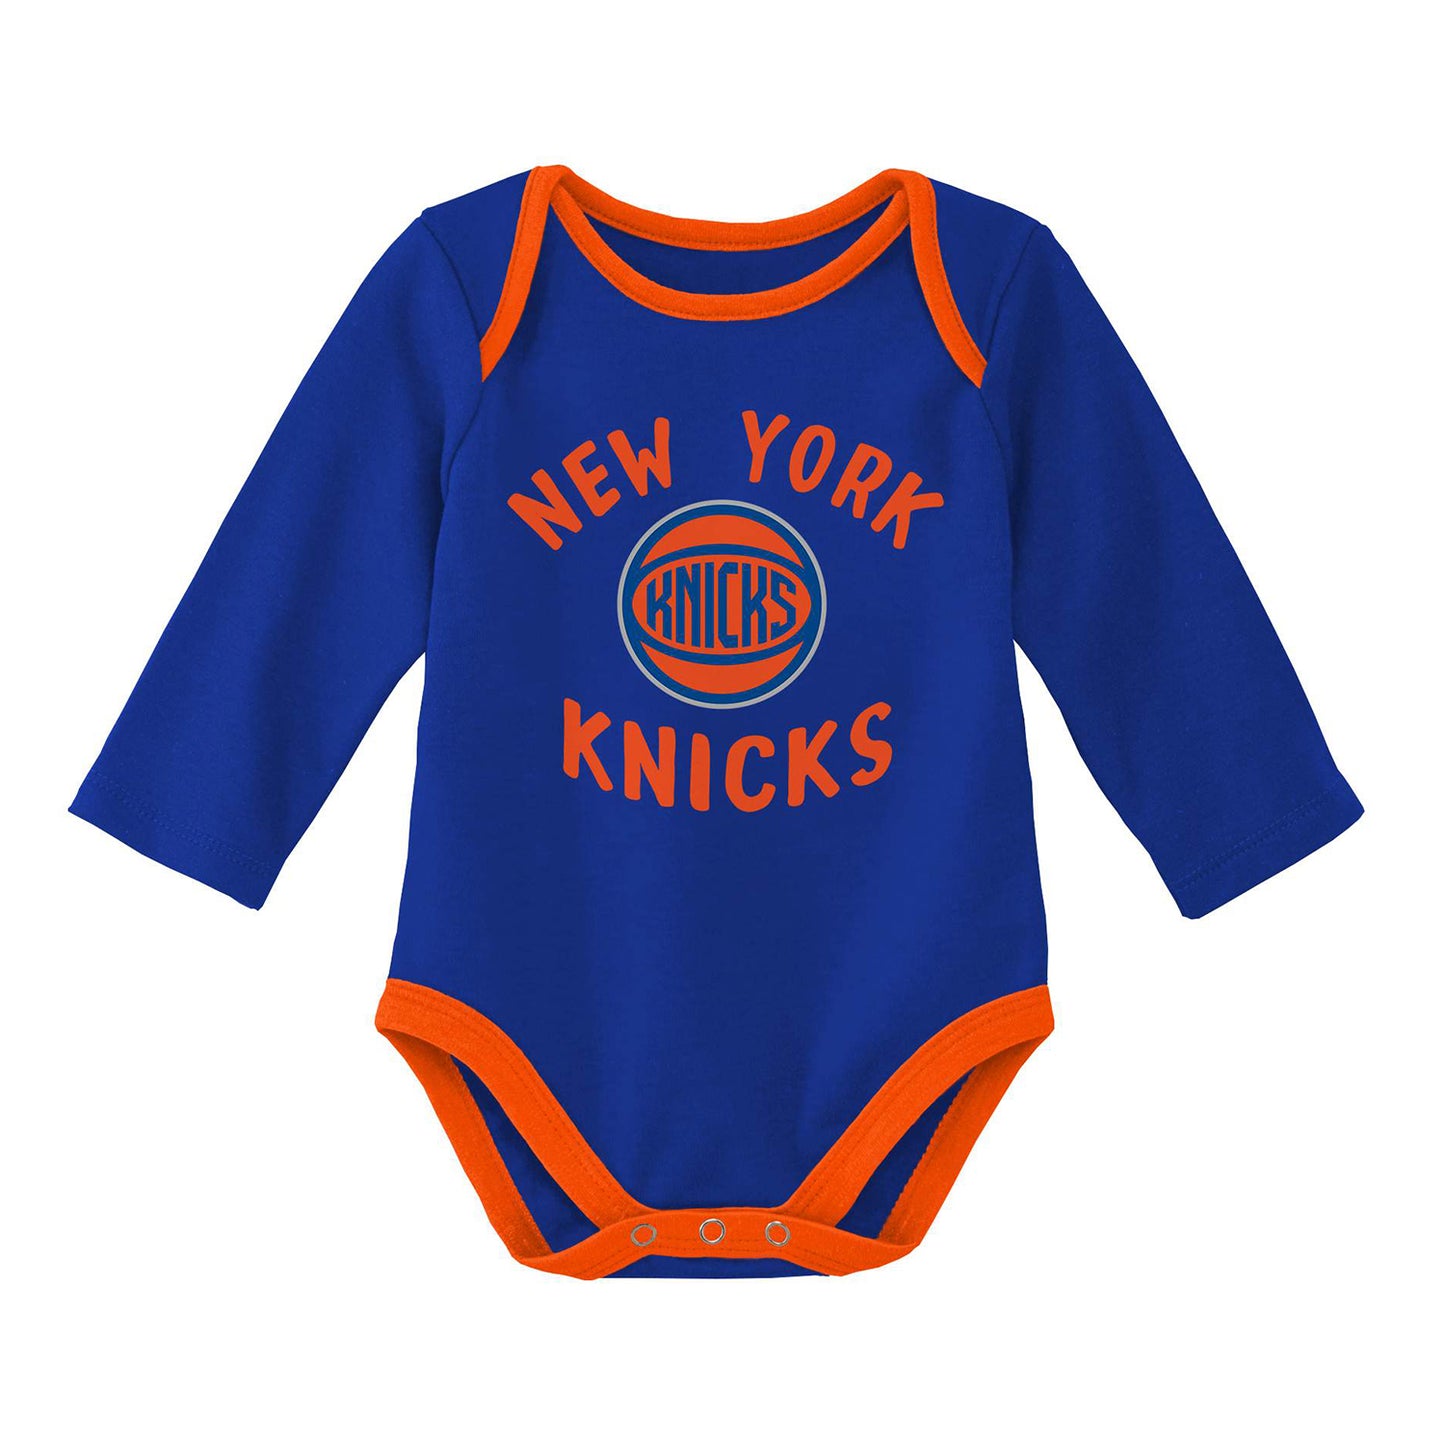 Newborn Knicks 2-Pack Long Sleeve Creeper Set In Blue & Orange - Front View Of Individual Creeper